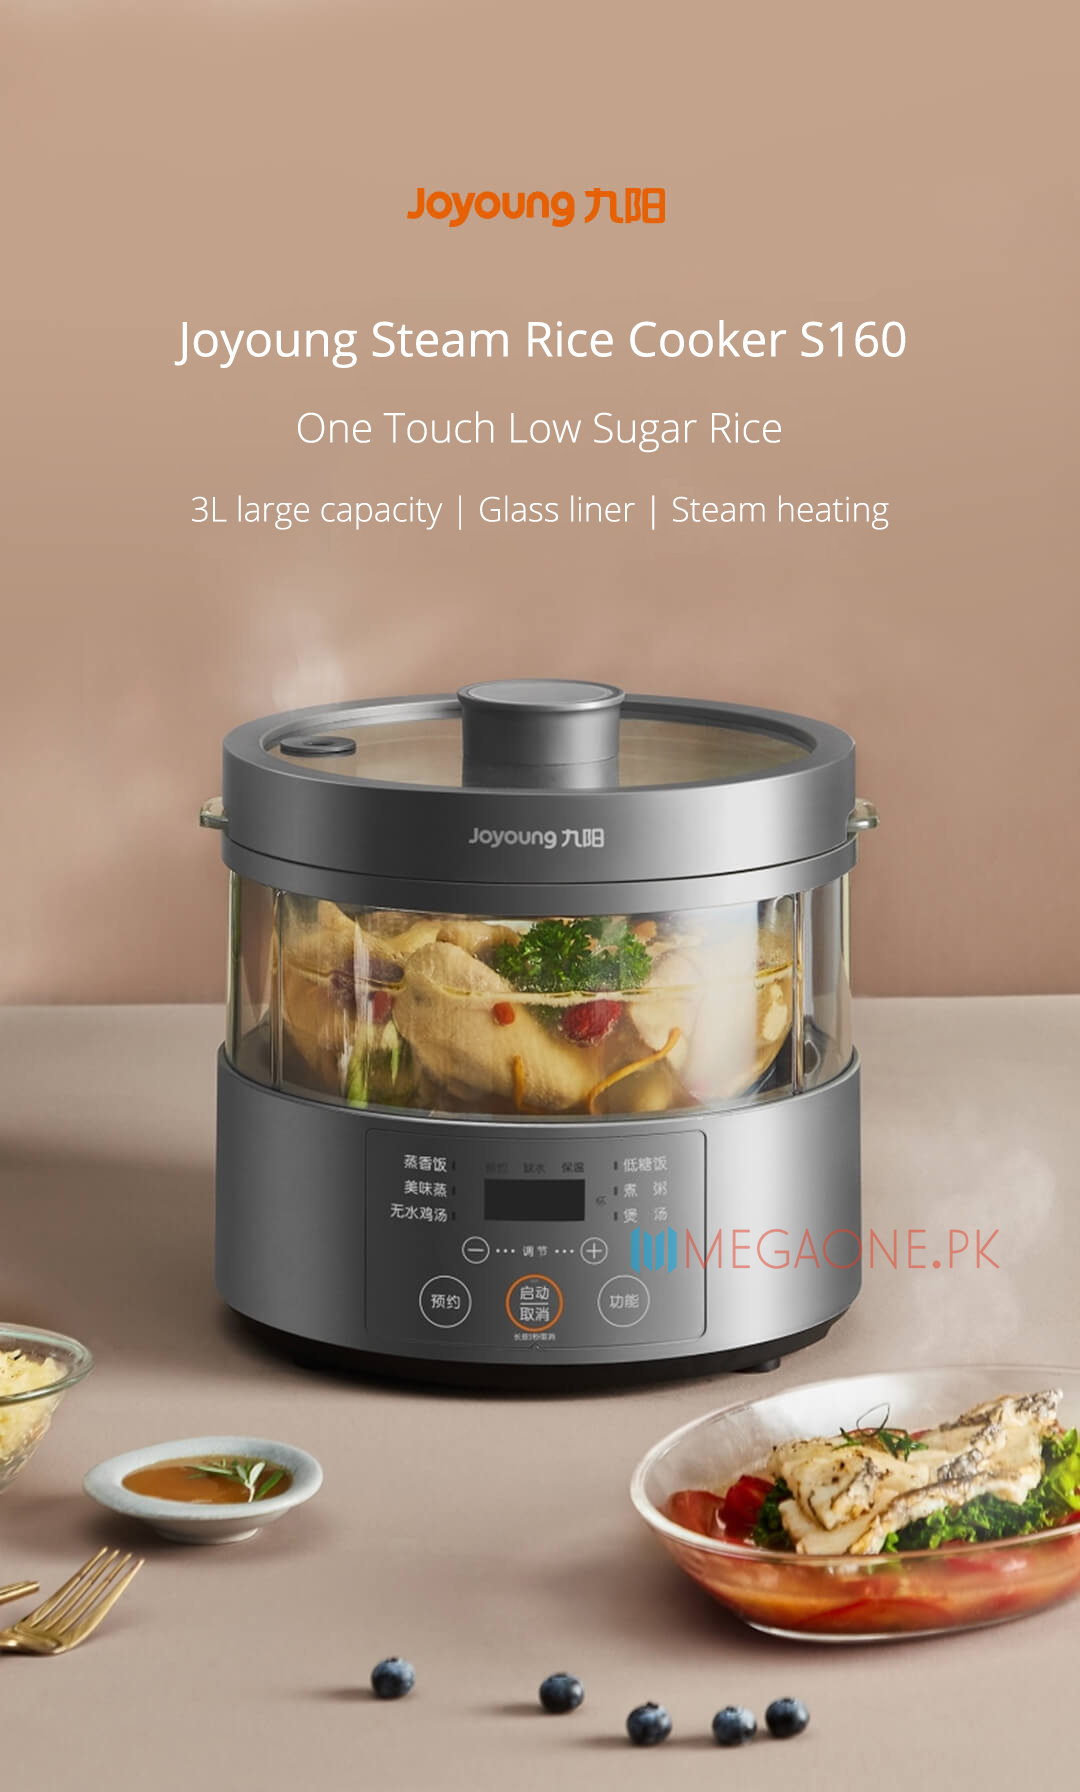 Joyoung Steam Rice Cooker S160